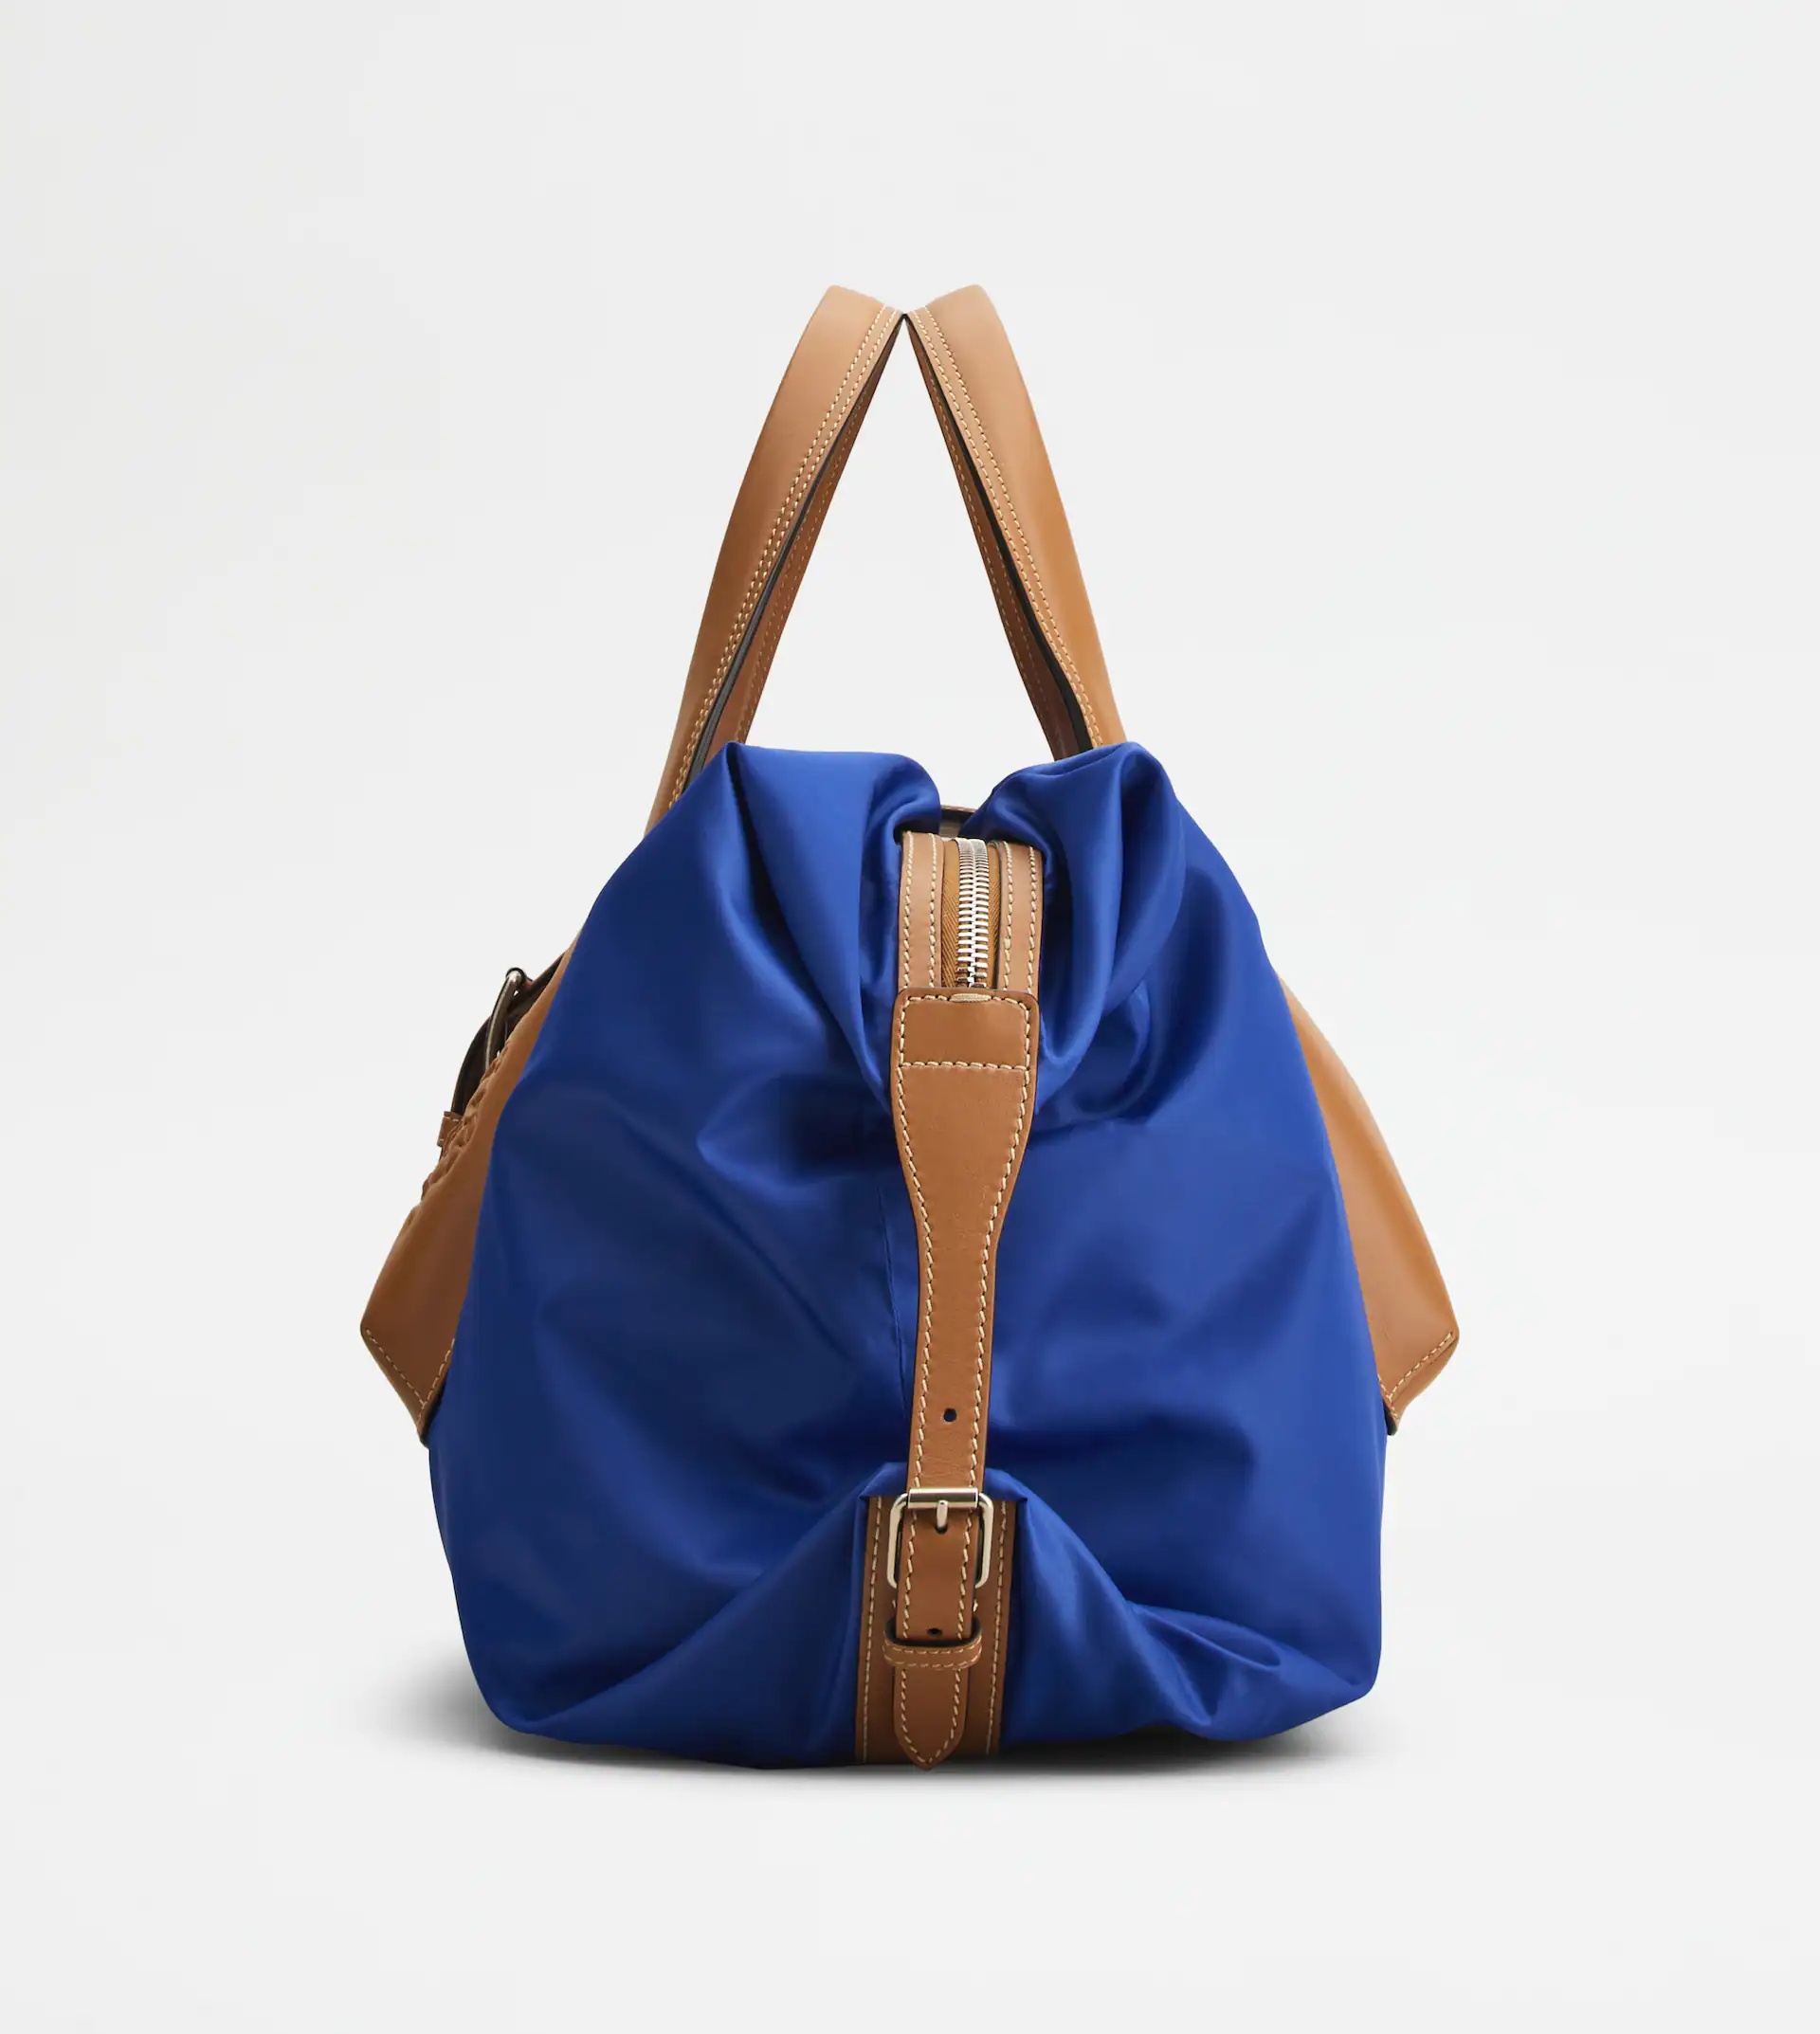 DUFFLE BAG IN FABRIC AND LEATHER MEDIUM - BLUE, BROWN - 3